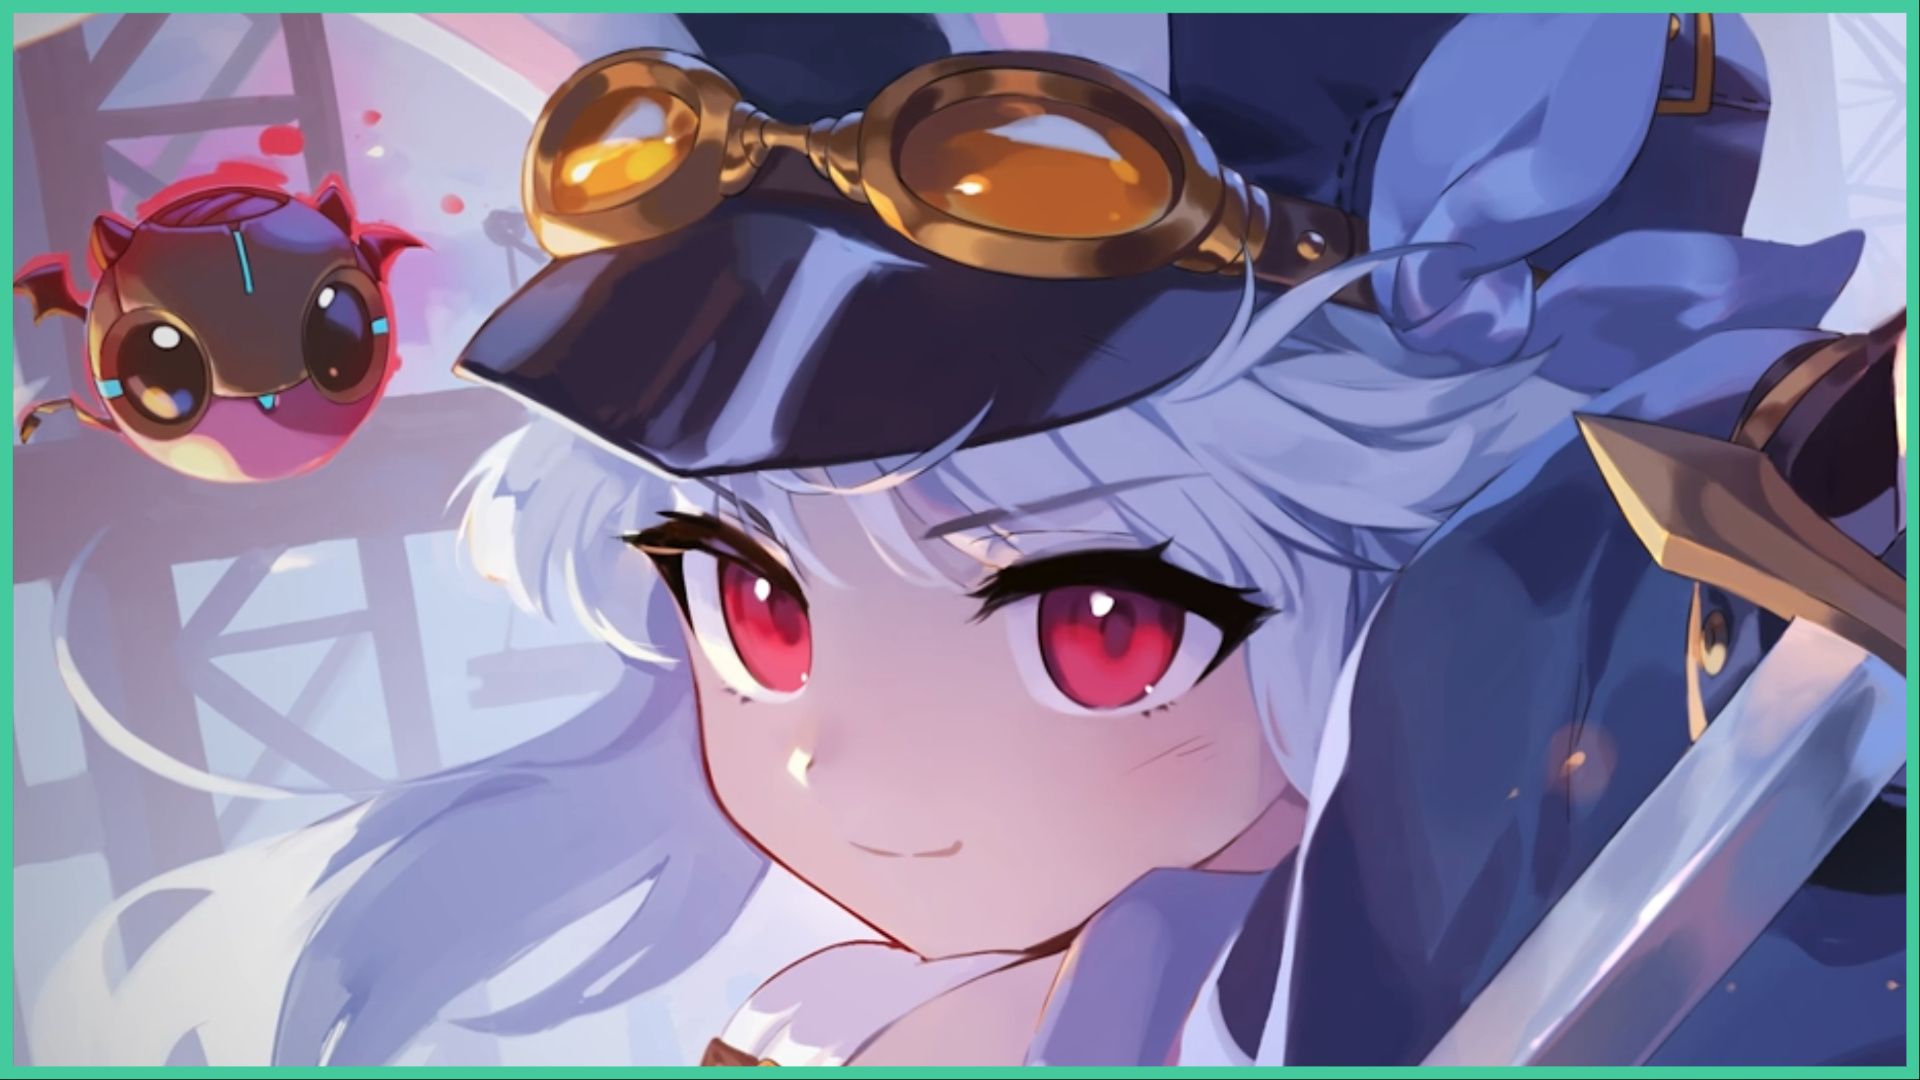 feature image for our tevi switch review, the image is official promo art for the game of tevi as she wears her hat with goggles on top, smiling at the viewer as she holds a sword slightly outside of the image, there is a floating robot orb next to her with wings